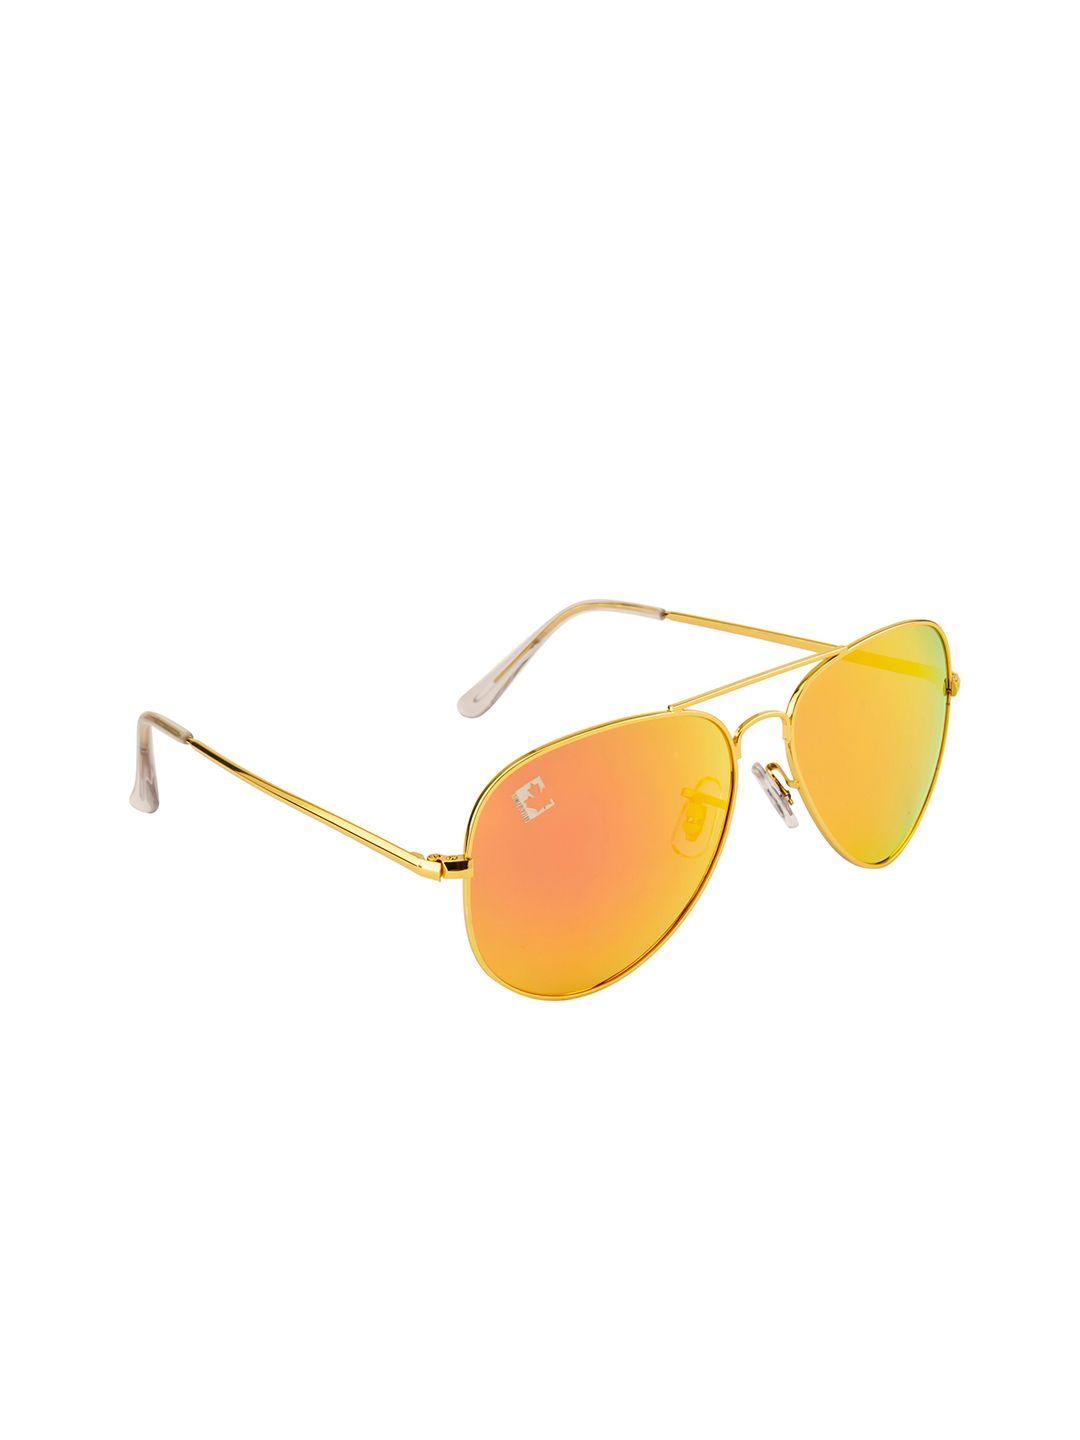 clark n palmer unisex red lens & gold-toned aviator sunglasses with polarised and uv protected lens